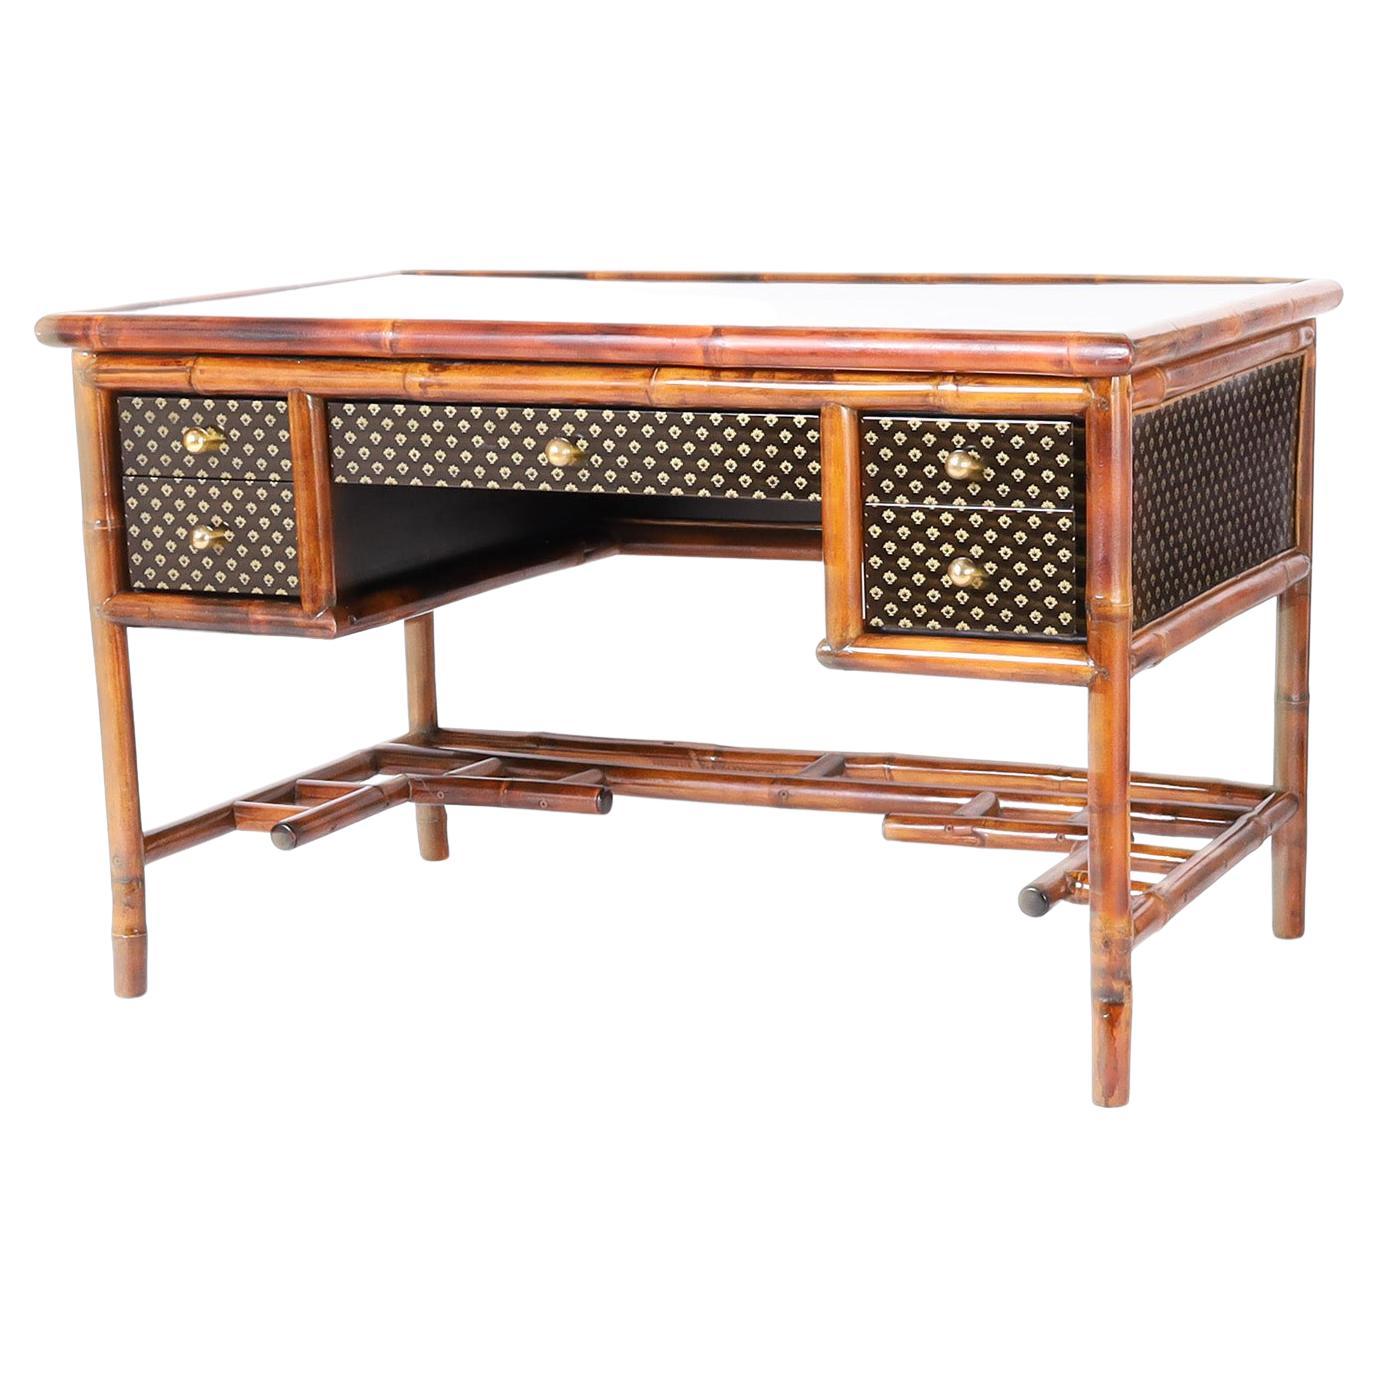 British Colonial Style Bamboo Desk